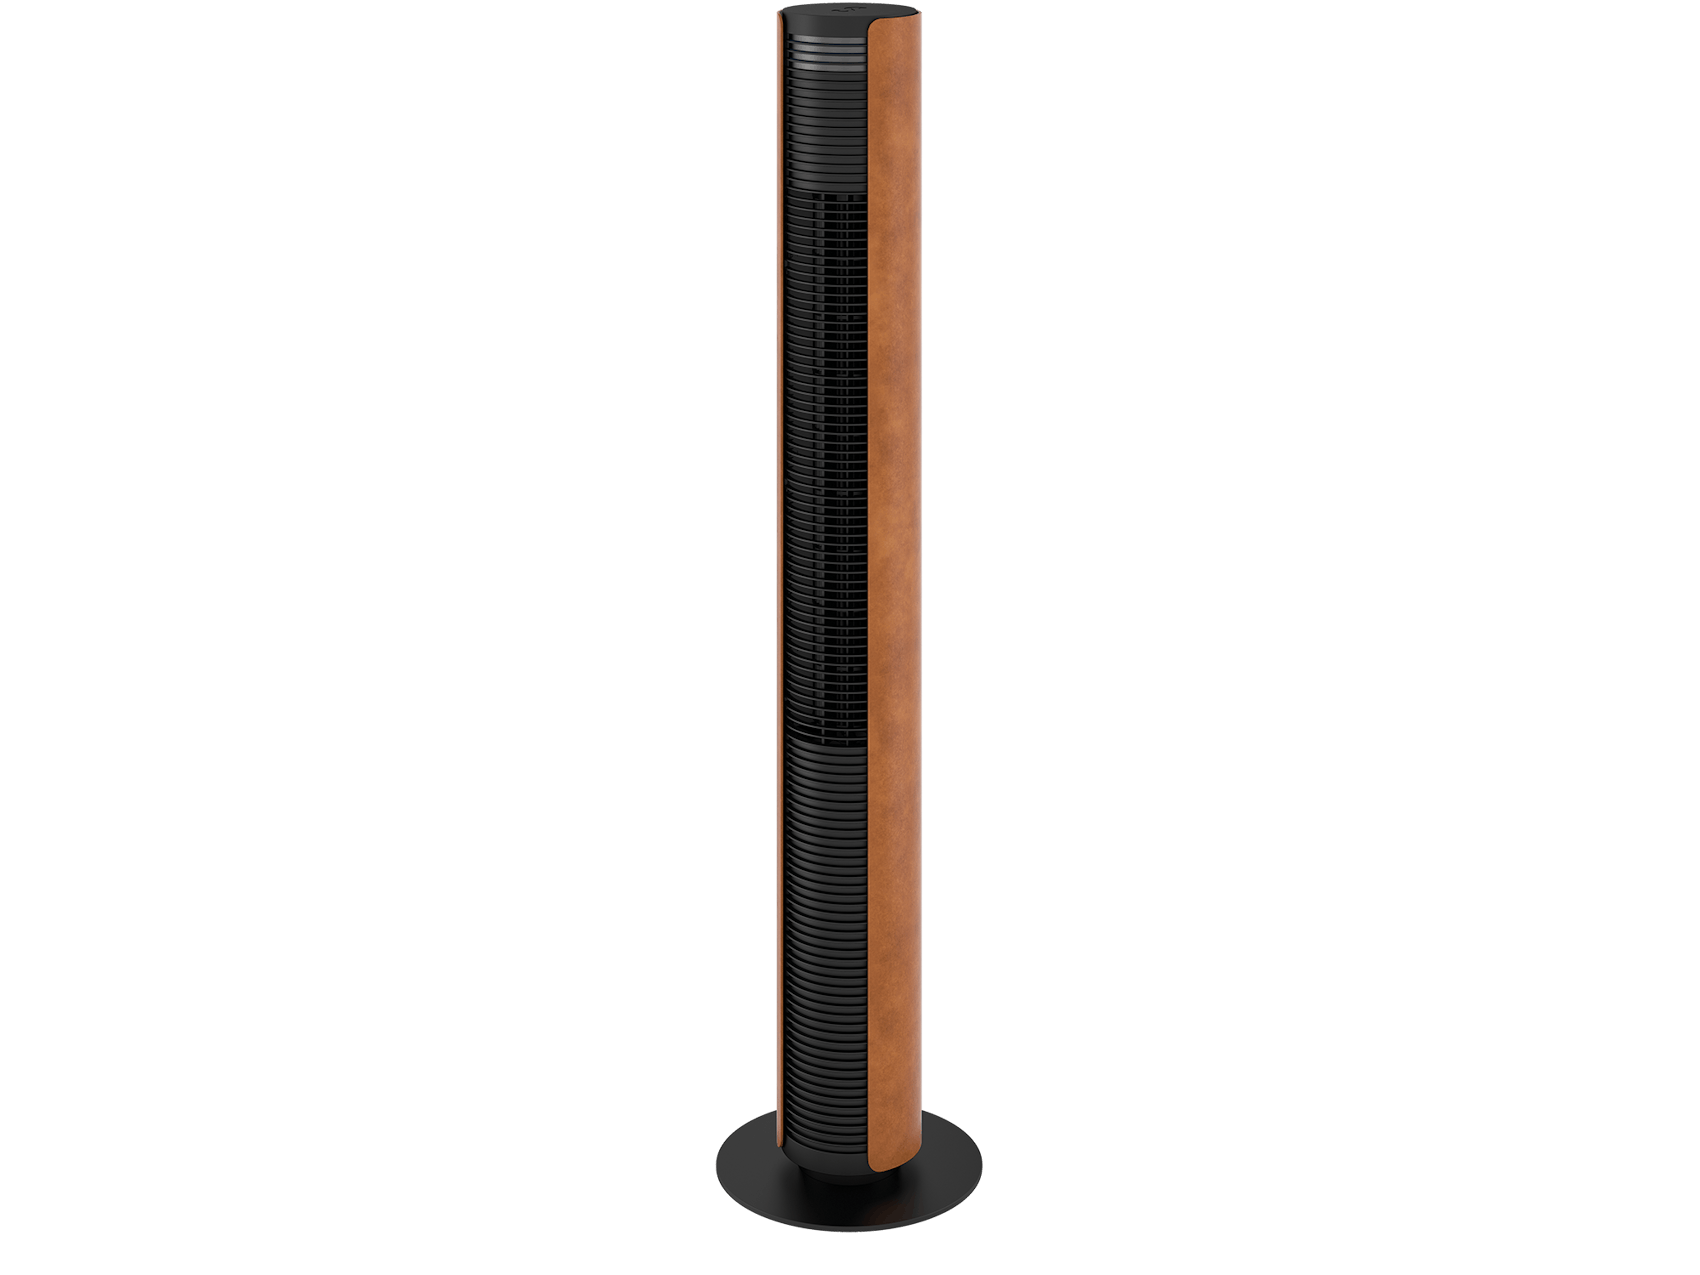 Peter leatherette tower fan by Stadler Form as perspective view